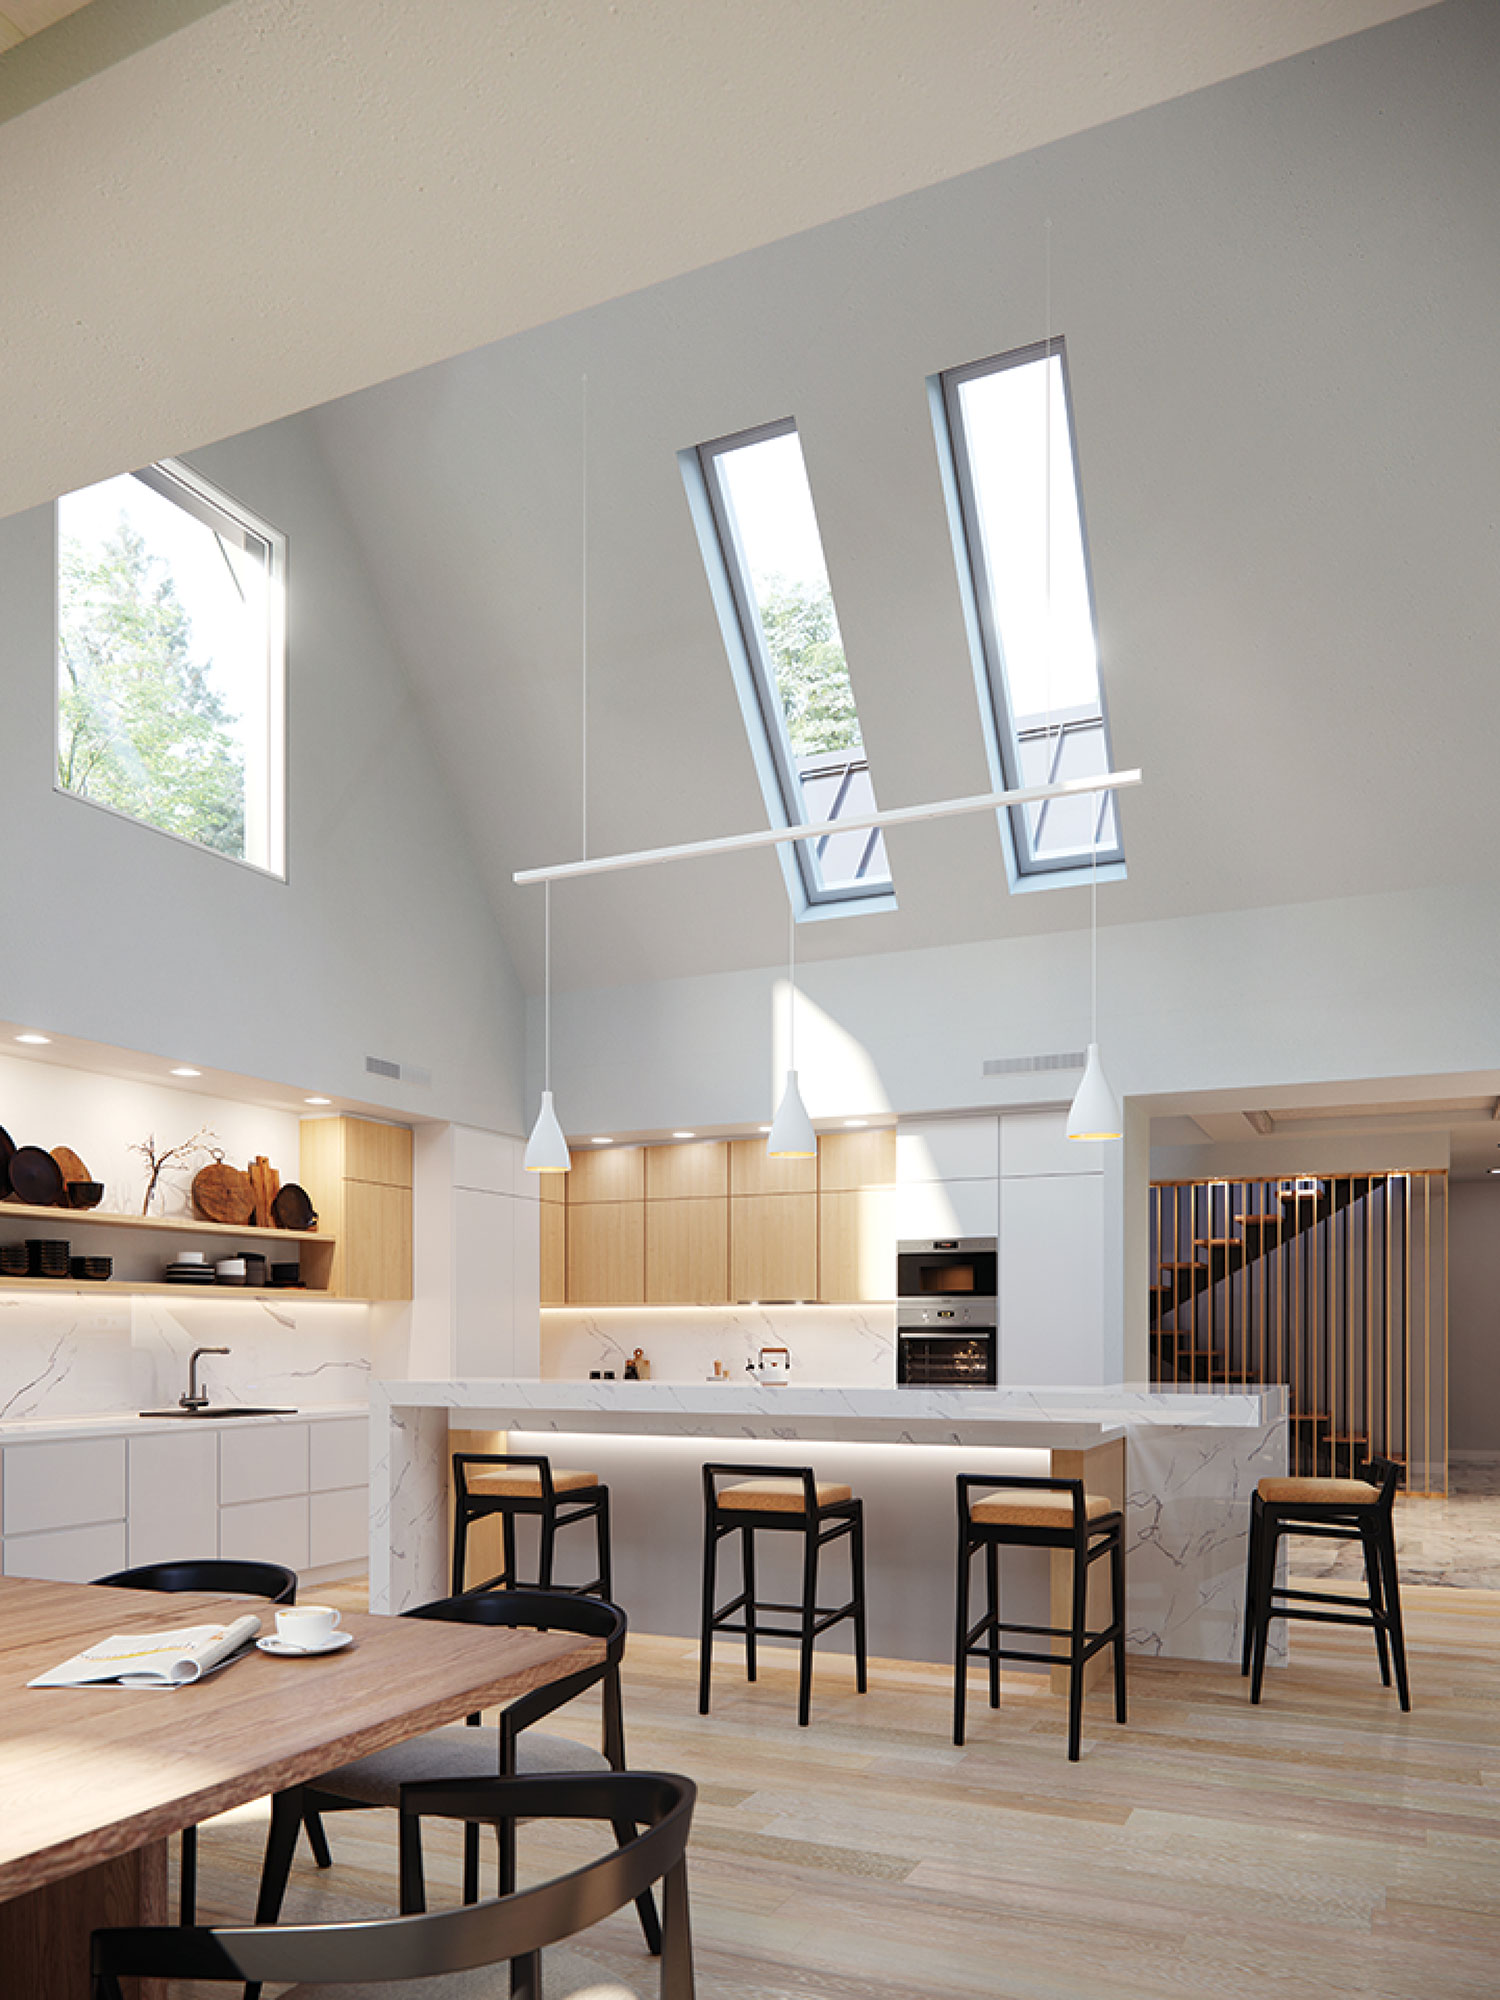 Two narrow and long, modern skylights in a sloped ceiling above a kitchen